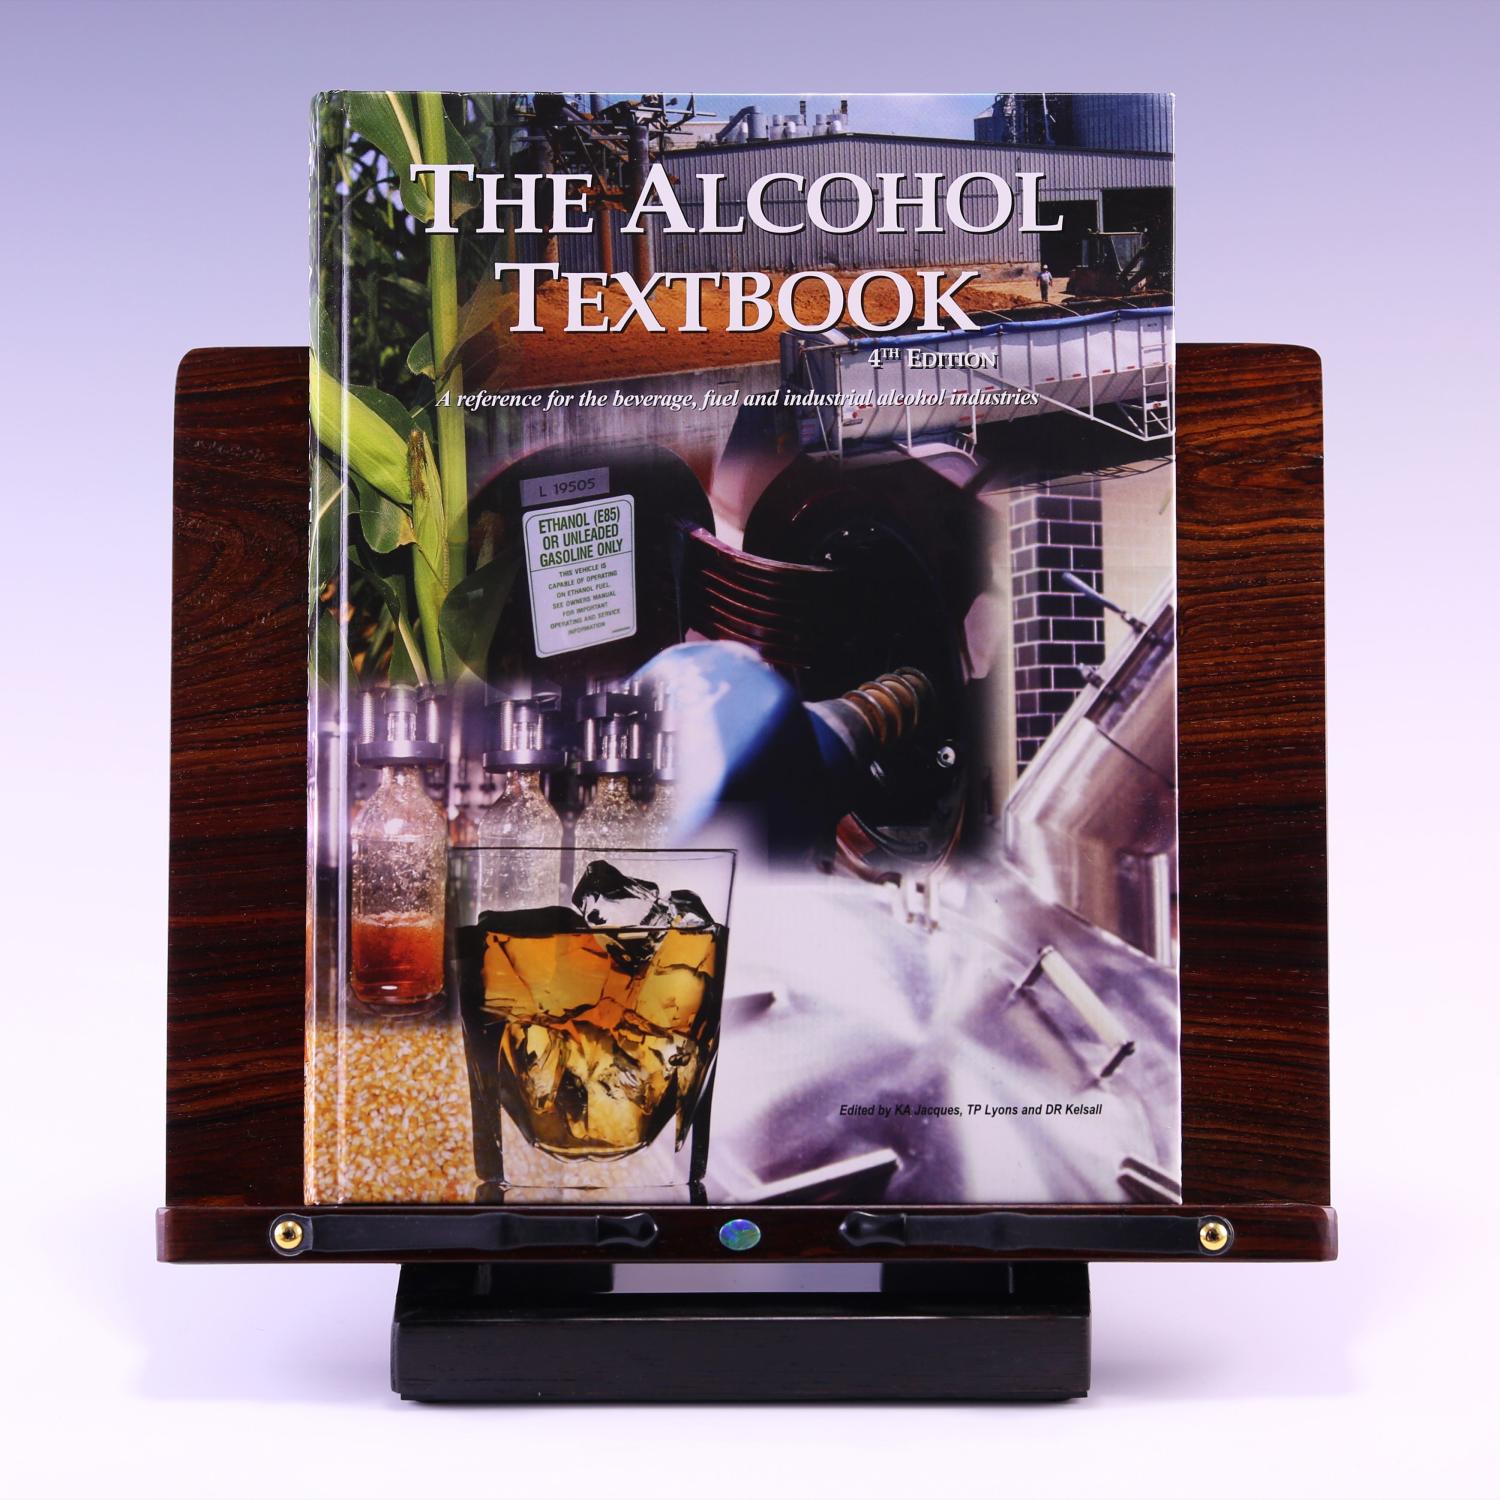 The Alcohol Textbook